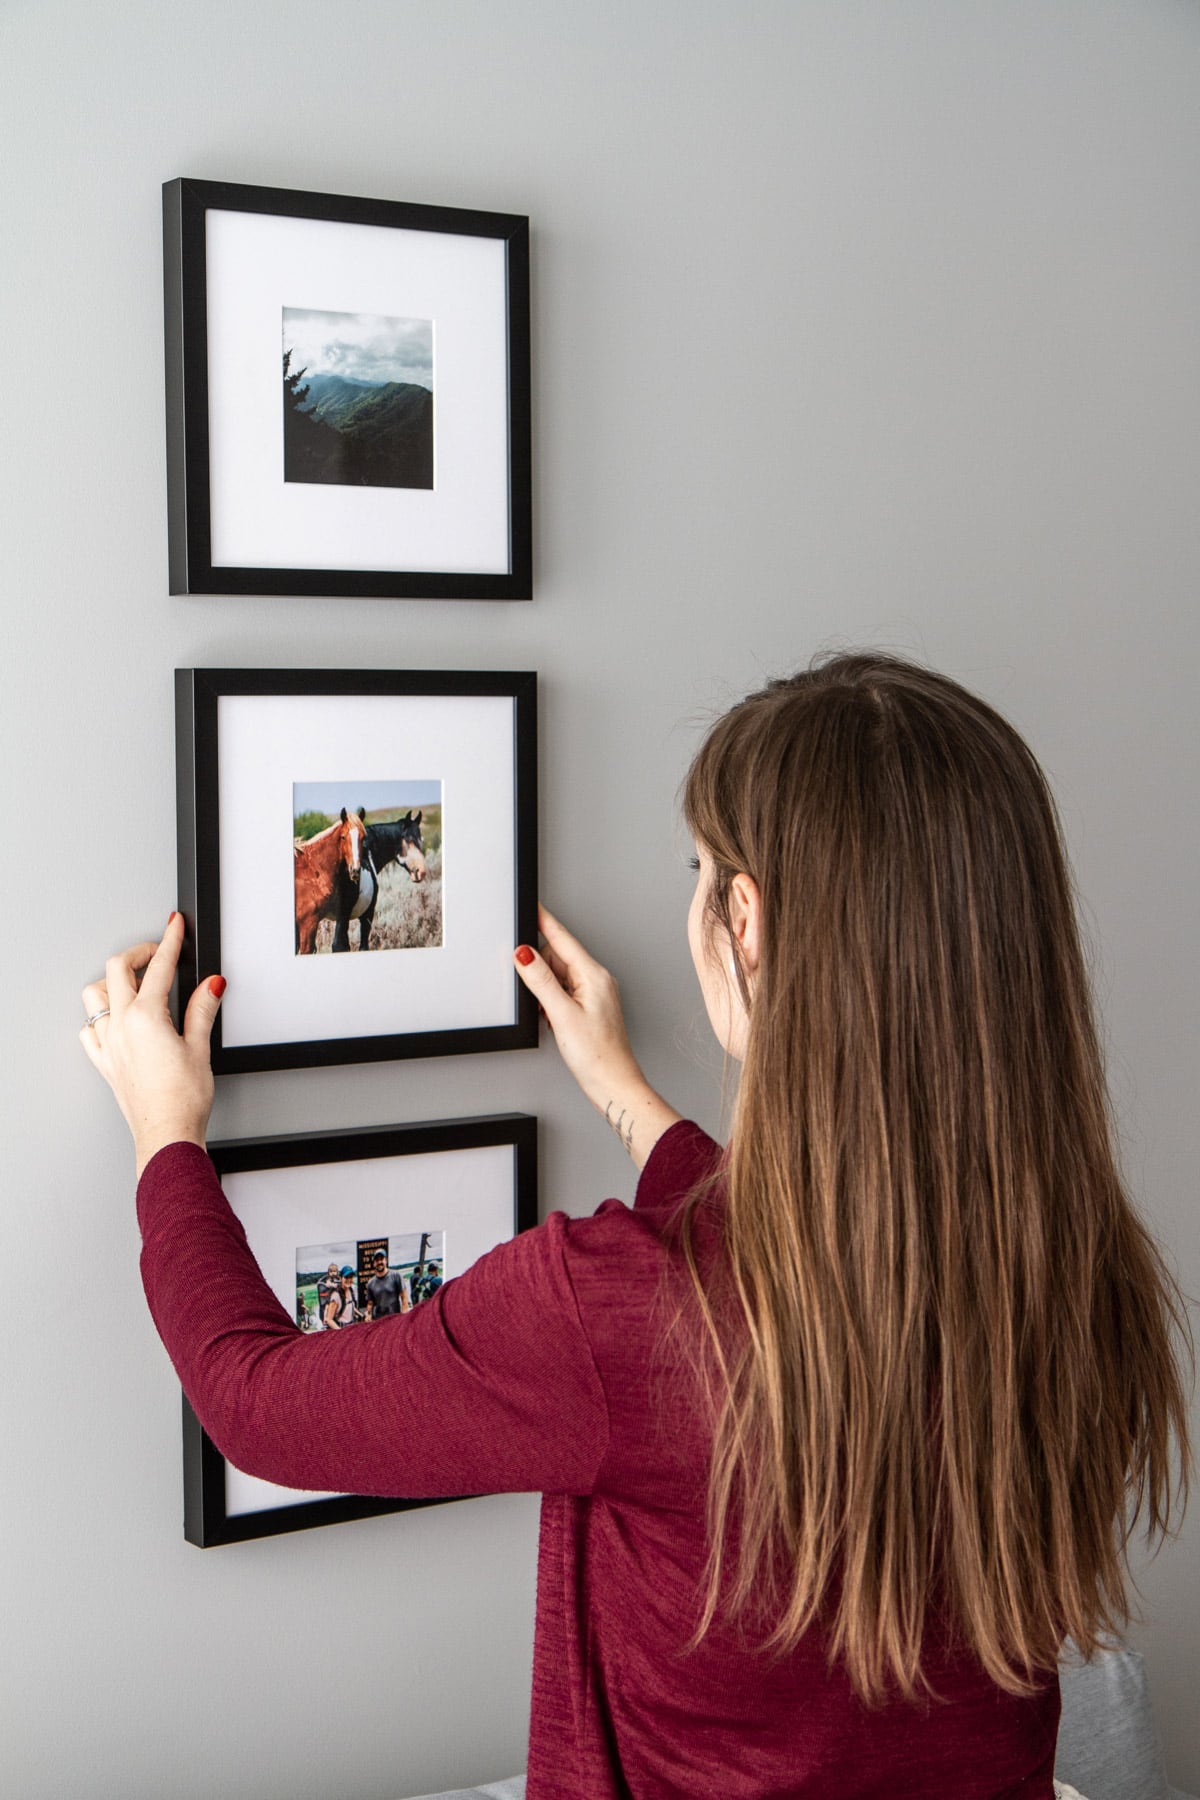 Framing Our Travels with Framebridge -- Framebridge makes it simple and effortless to frame your memories to treasure for years to come. @girlversusdough #girlversusdough #Framebridge #gallerywall #homedesign